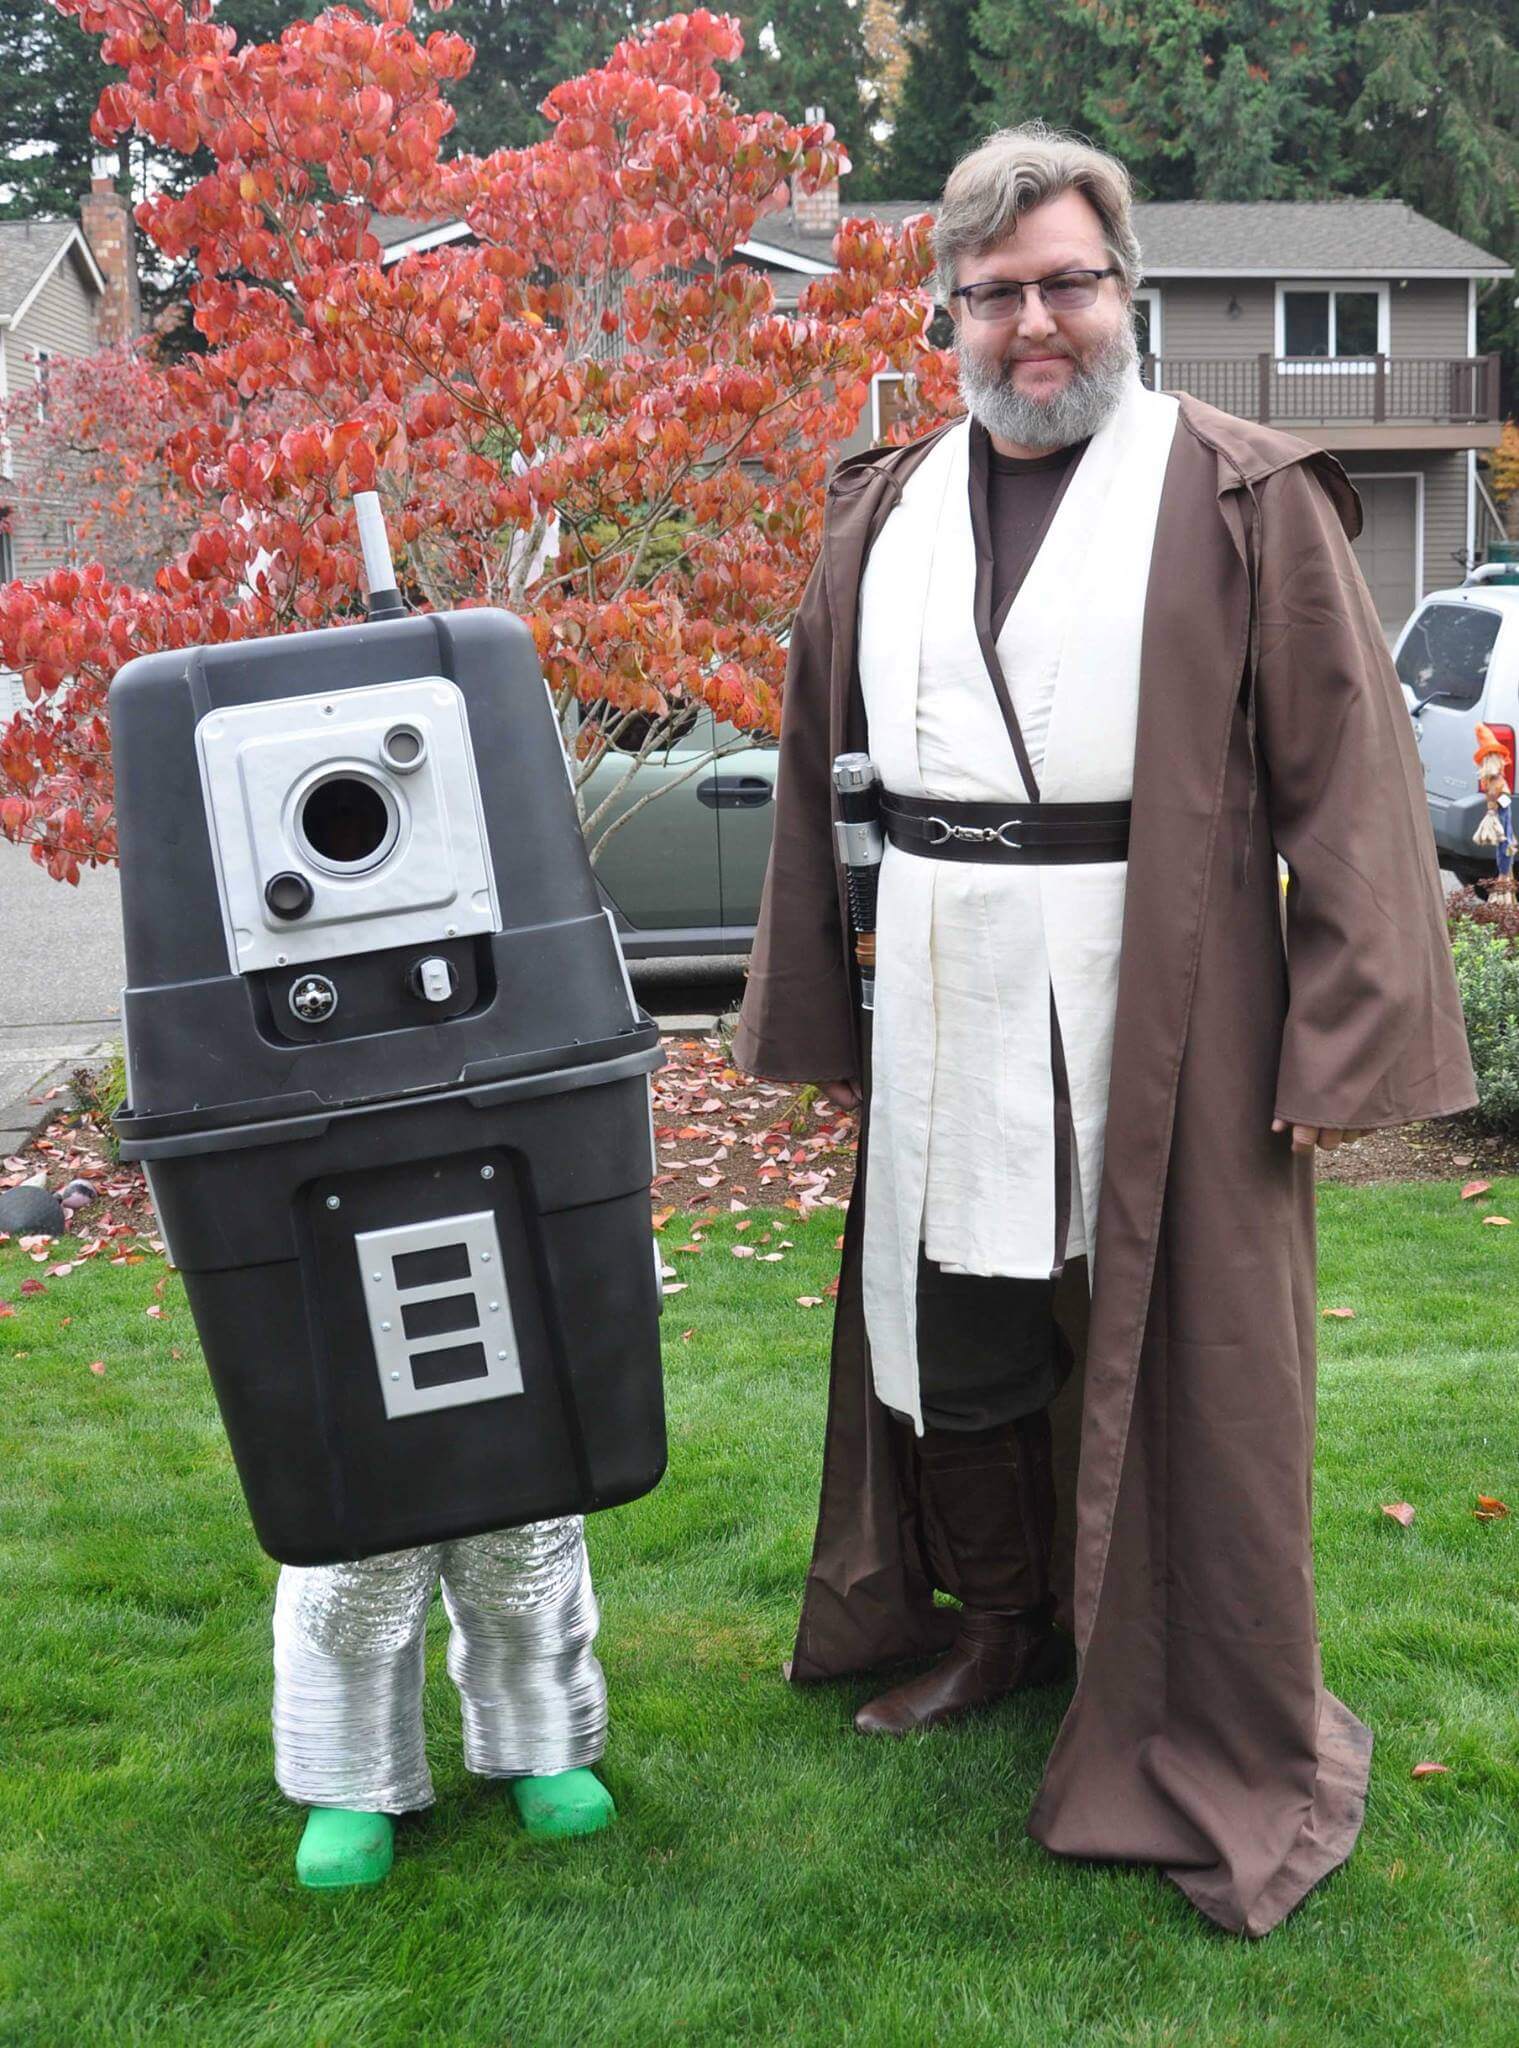 DigiPen Faculty member Bill Morrison dressed as a jedi knight next to his son dressed as a droid pose for a photo